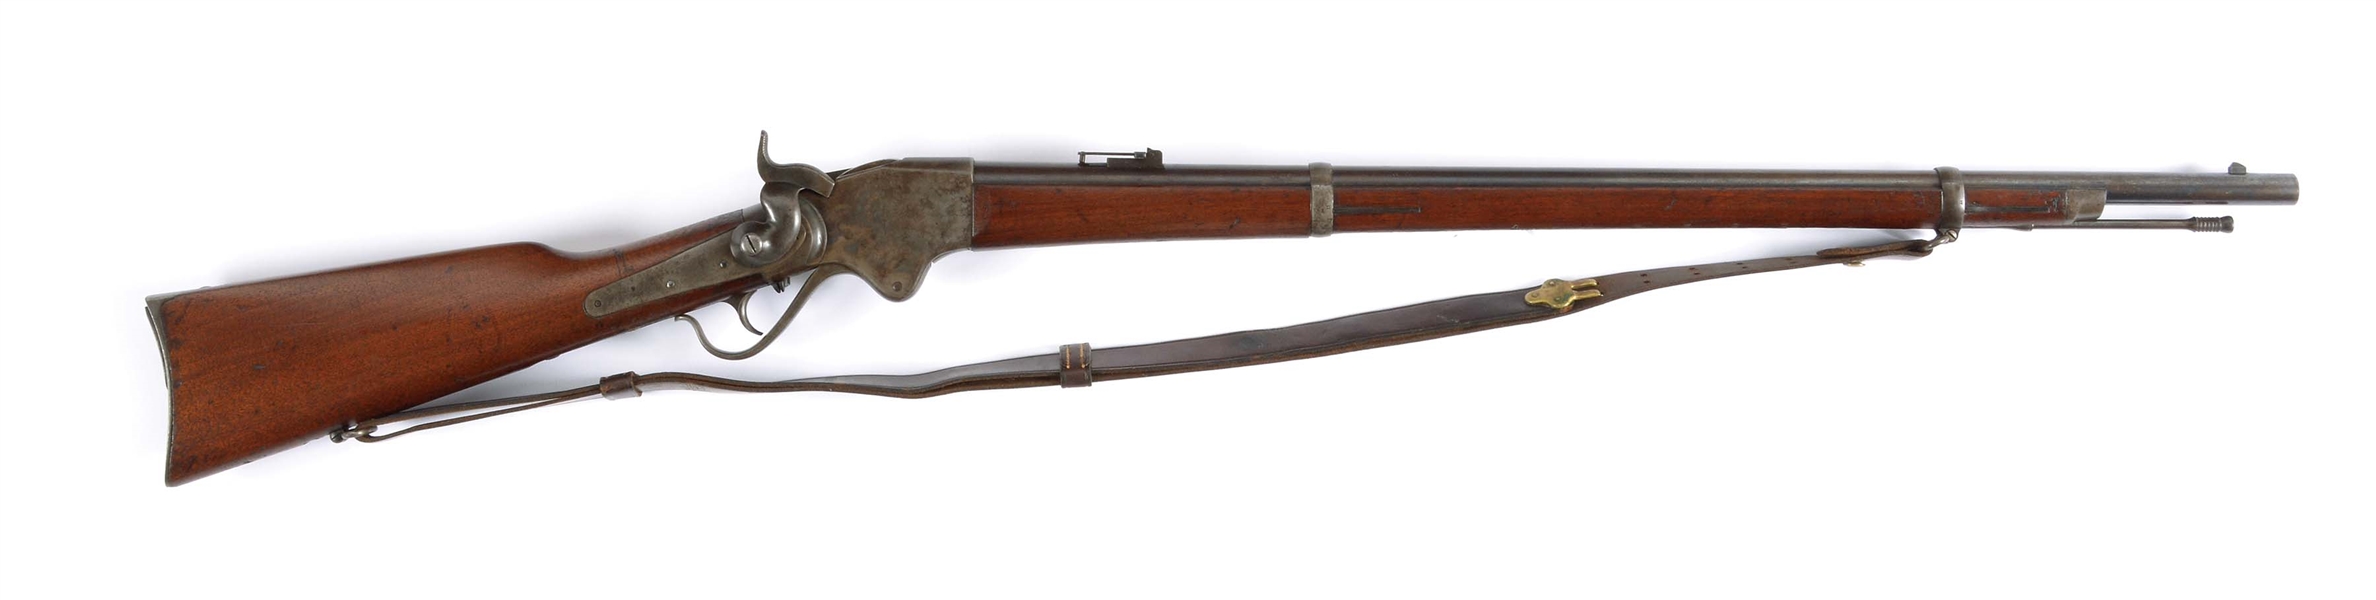 (A) SPRINGFIELD-SPENCER 1865 LEVER ACTION RIFLE.